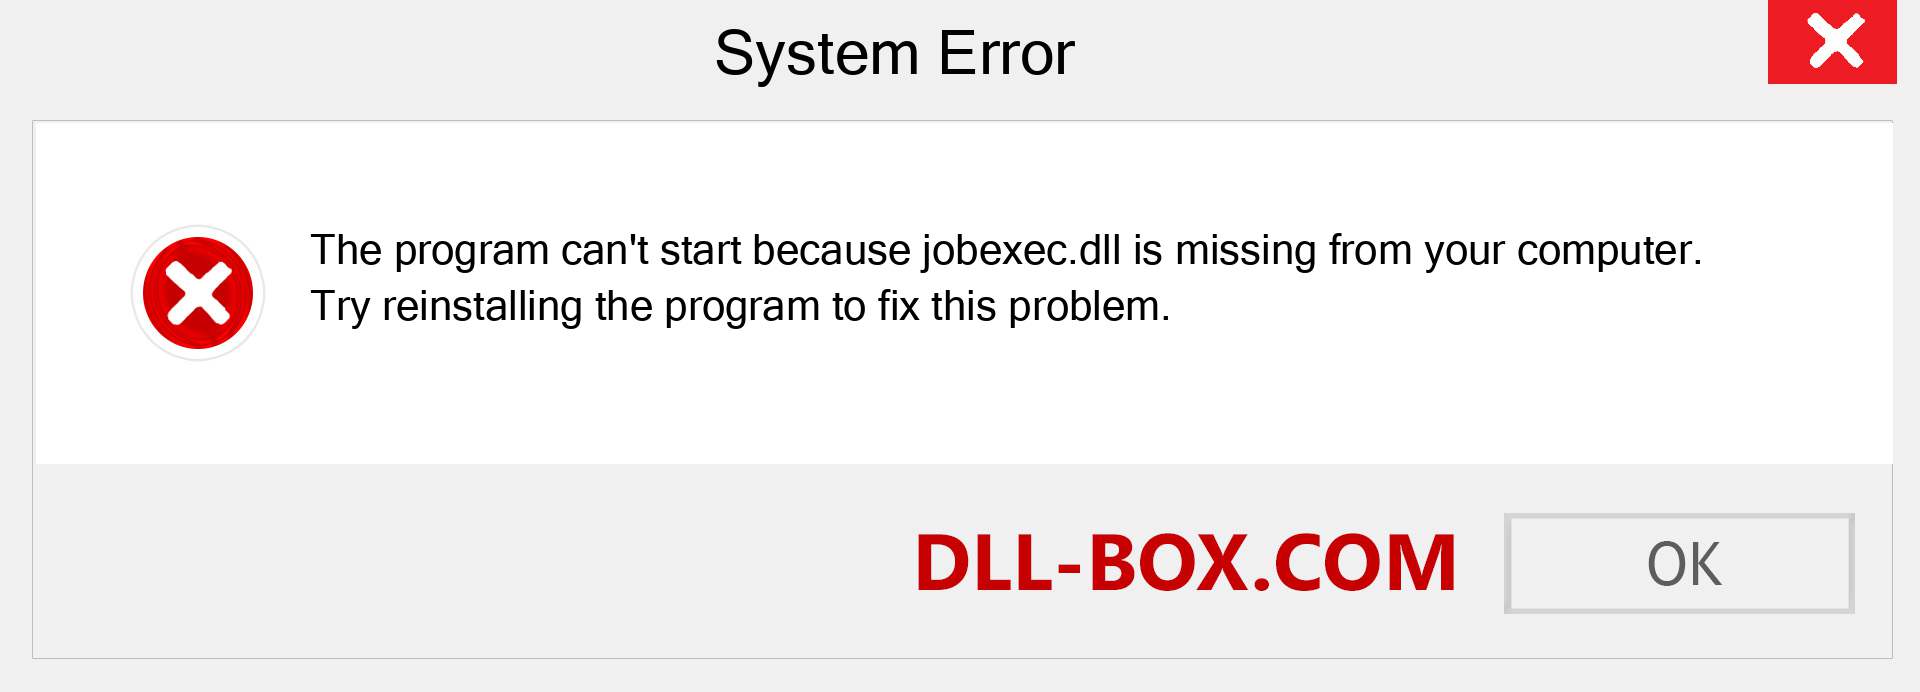  jobexec.dll file is missing?. Download for Windows 7, 8, 10 - Fix  jobexec dll Missing Error on Windows, photos, images